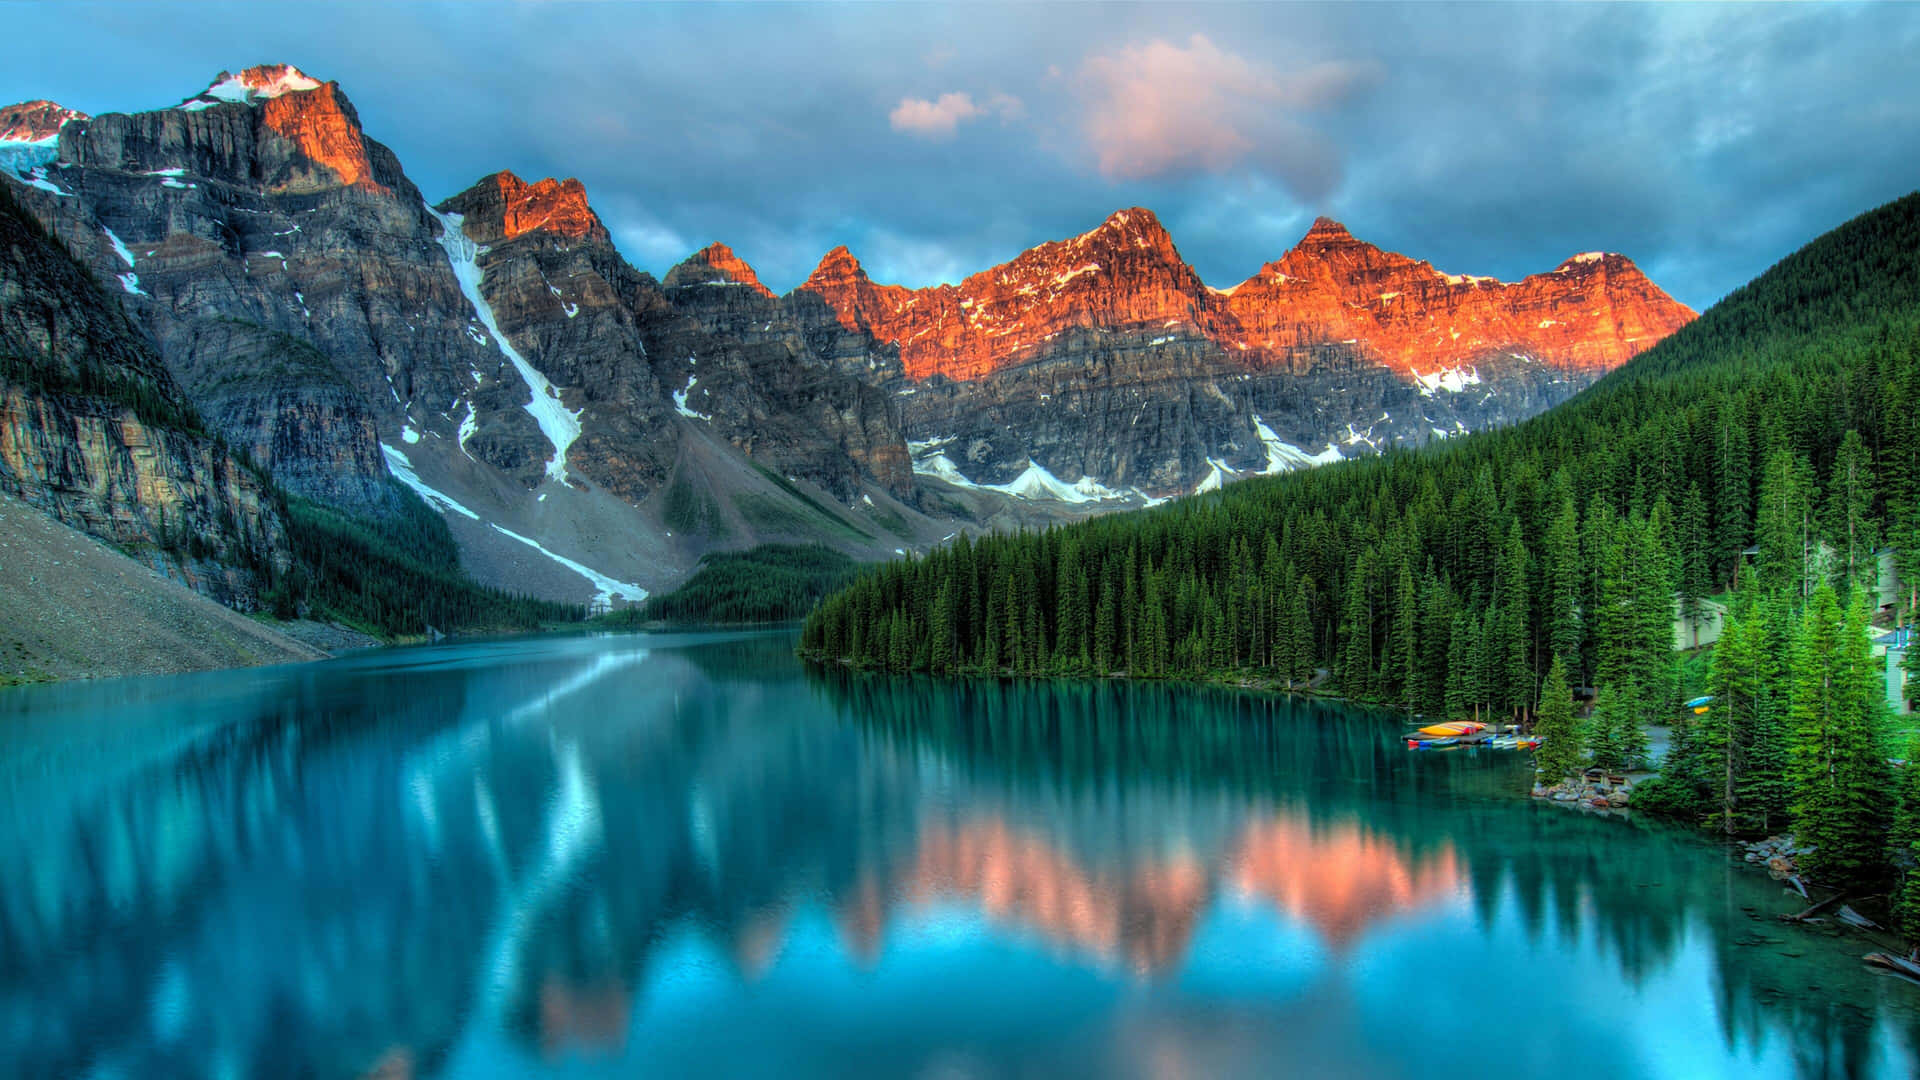 Explore the beauty of Canada!